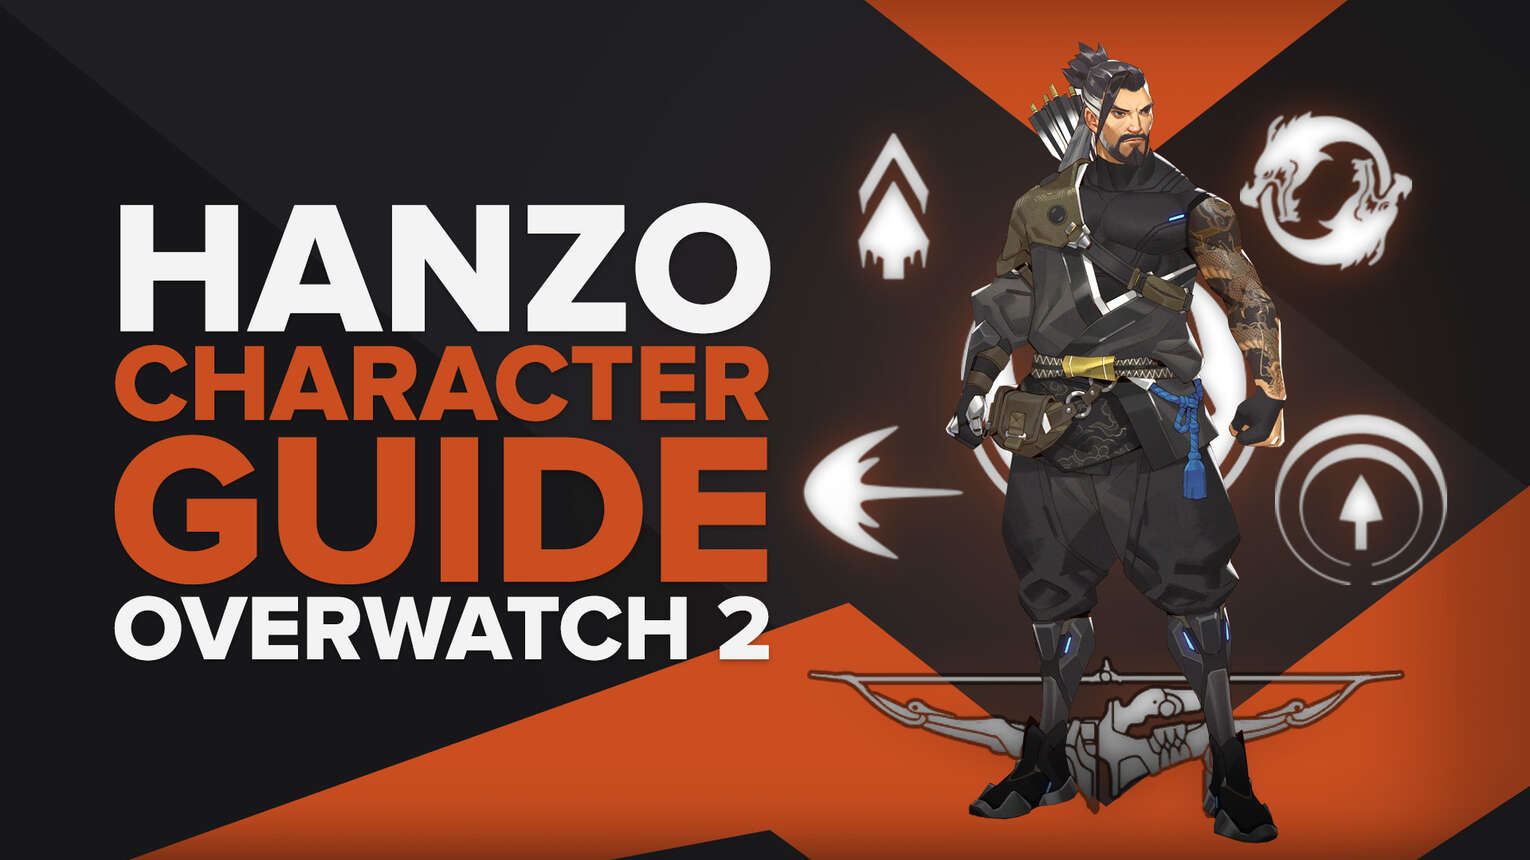 How To Play Hanzo in Overwatch 2 [Abilities, Tips & More]